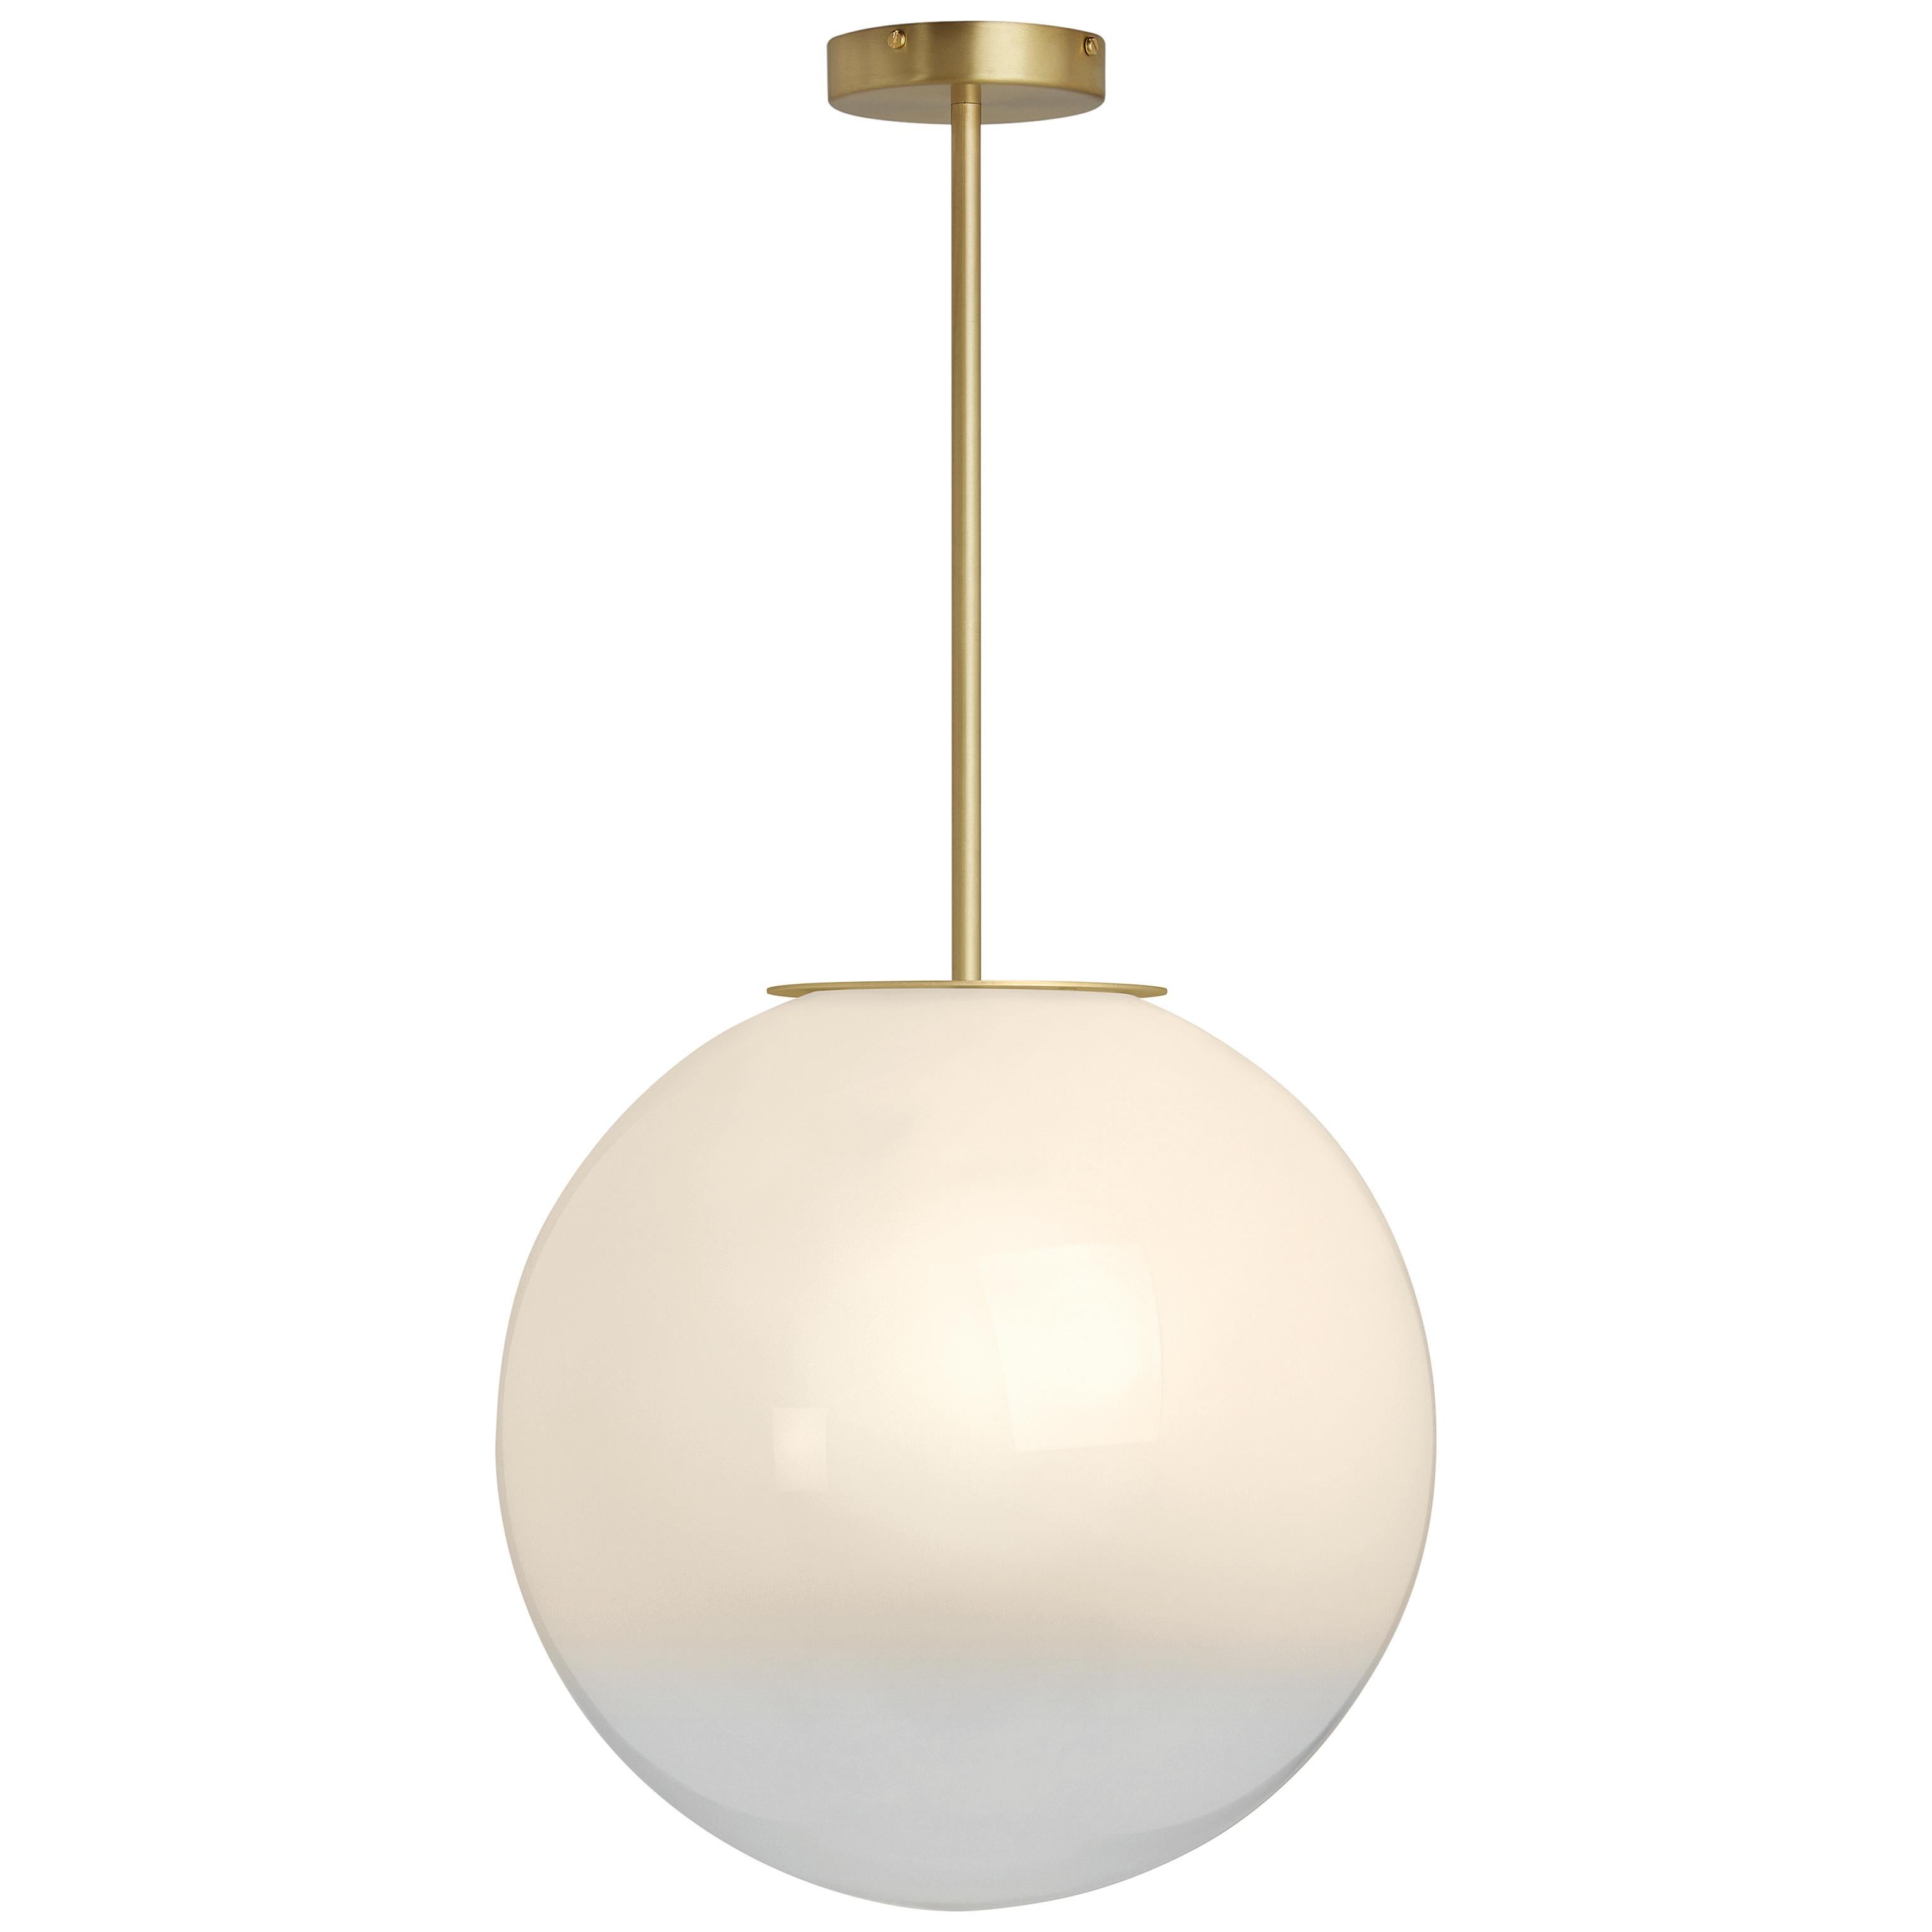 Skye medium pendant by CTO Lighting
Materials: satin brass with sfumato glass shade
Also available in dark bronze with sfumato glass shade
Dimensions: H 39 x W 40 cm 

All our lamps can be wired according to each country. If sold to the USA it will